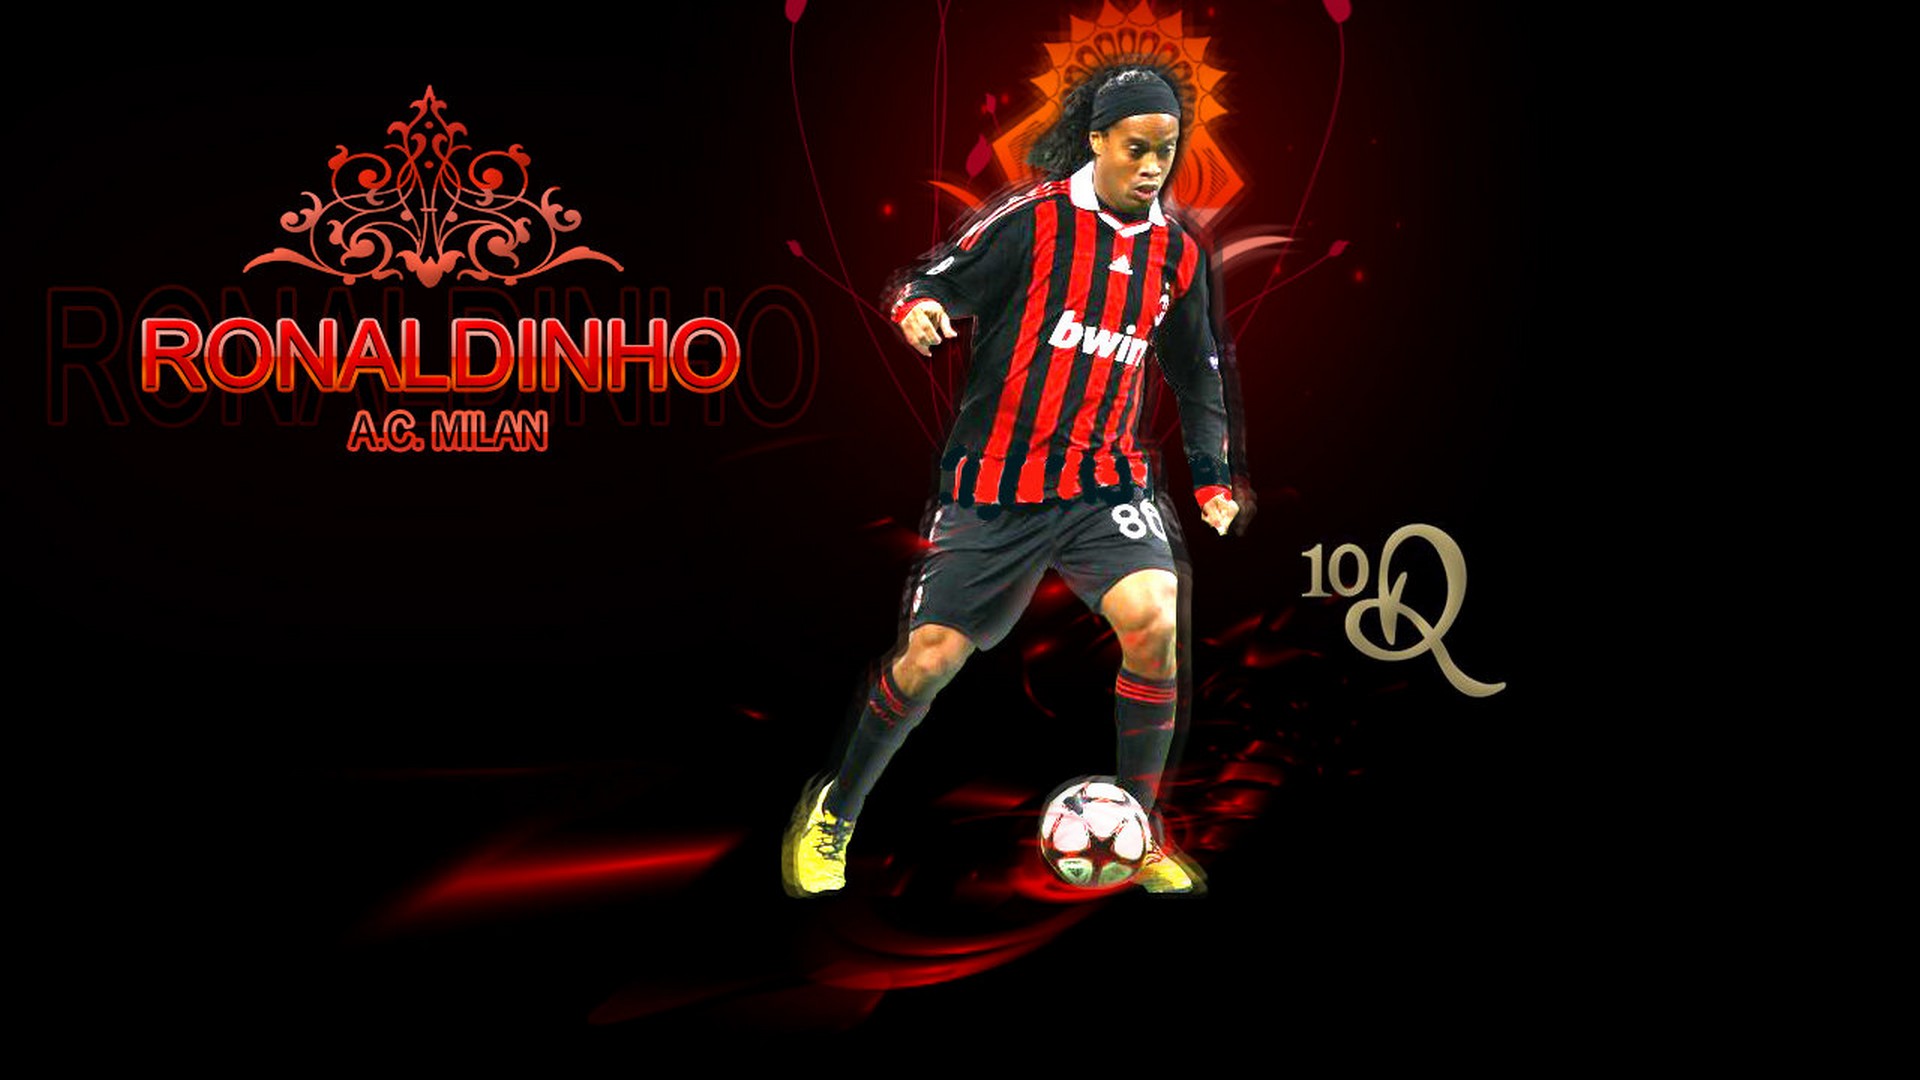 AC Milan Legends HD Wallpapers with high-resolution 1920x1080 pixel. You can use this wallpaper for your Desktop Computers, Mac Screensavers, Windows Backgrounds, iPhone Wallpapers, Tablet or Android Lock screen and another Mobile device